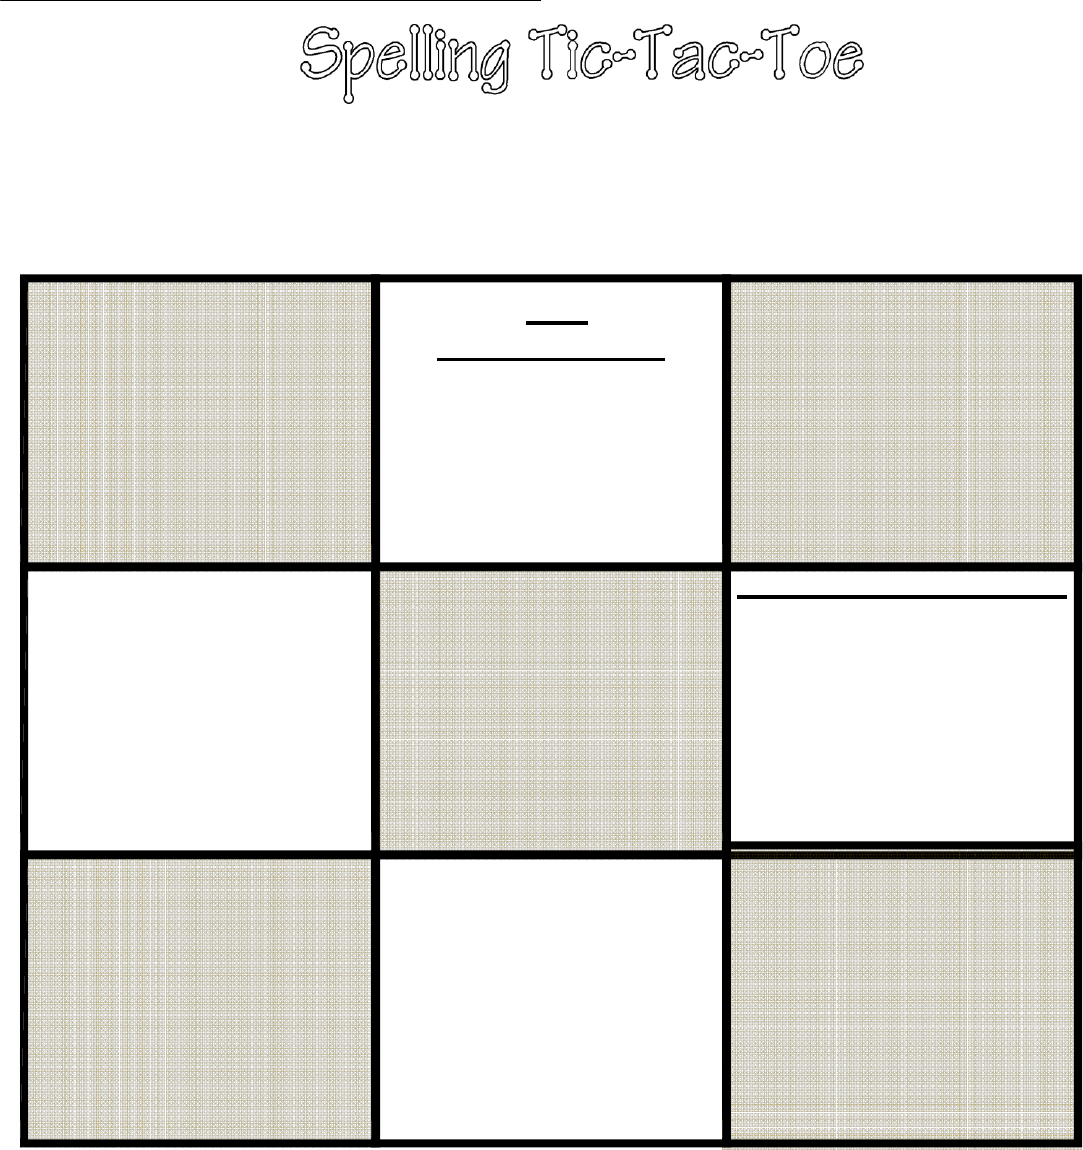 67A Tic Tac Toe Template | Wiring Library Throughout Tic Tac Toe Template Word